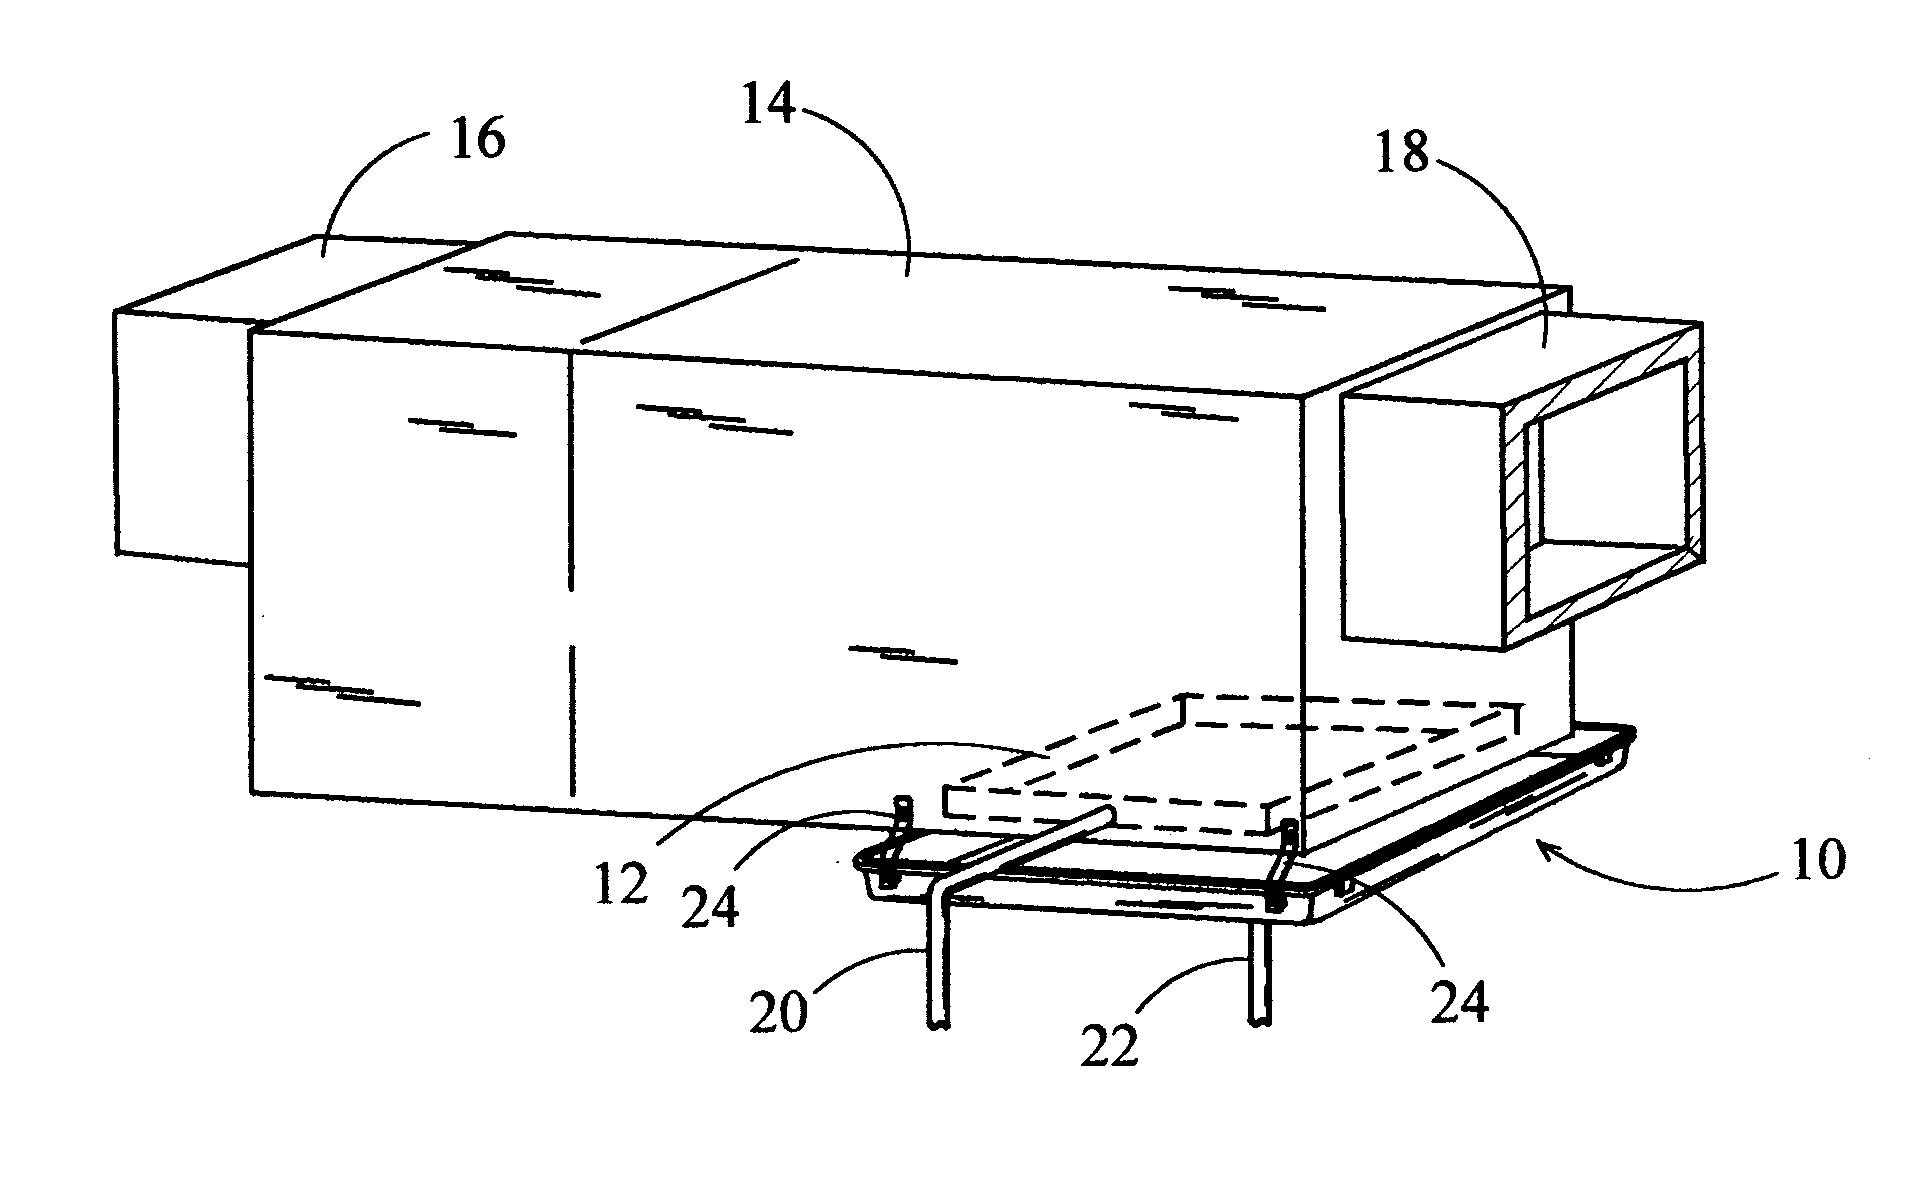 Condensate secondary pan for a central air conditioning system